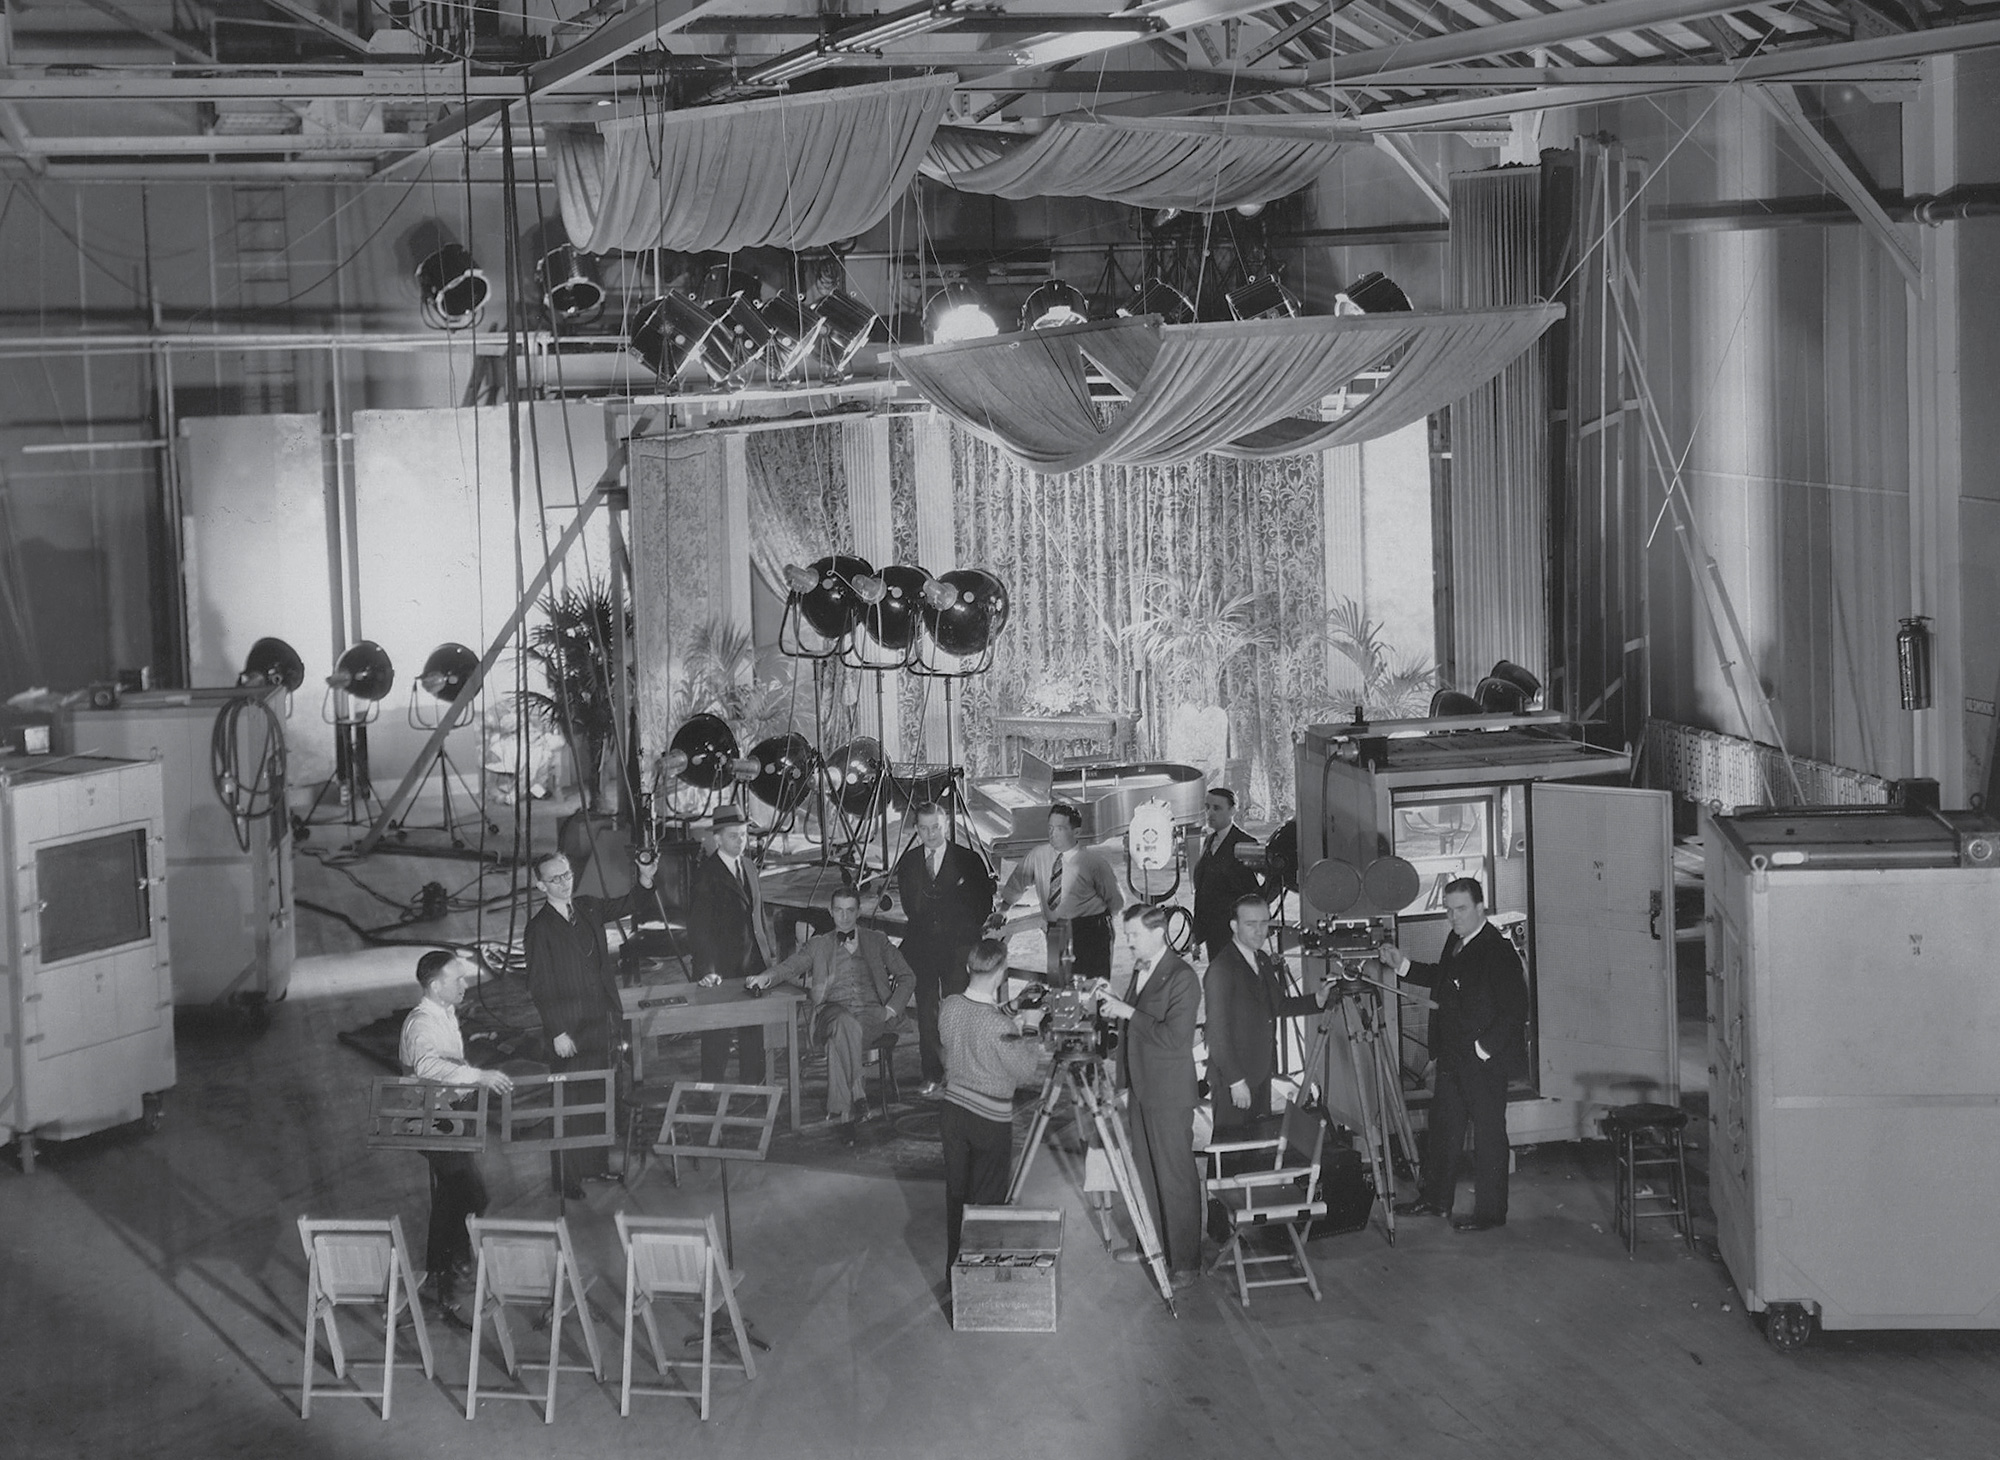 Production shot showing one of the sound stages at Warner Brothers’ Brooklyn studio, ca. 1930. The large “cabins”—soundproof booths that housed the cameras—were on rollers and could be moved. Often up to three cameras shot simultaneously from different angles. The Vitaphone sound-on-disc system allowed sounds recorded live during filming to later be merged with additional background music and sound effects onto one new composite disk that was played in the cinema during sceenings. The Jazz Singer was an early Vitaphone film. Courtesy Ron Hutchinson, The Vitaphone Project.